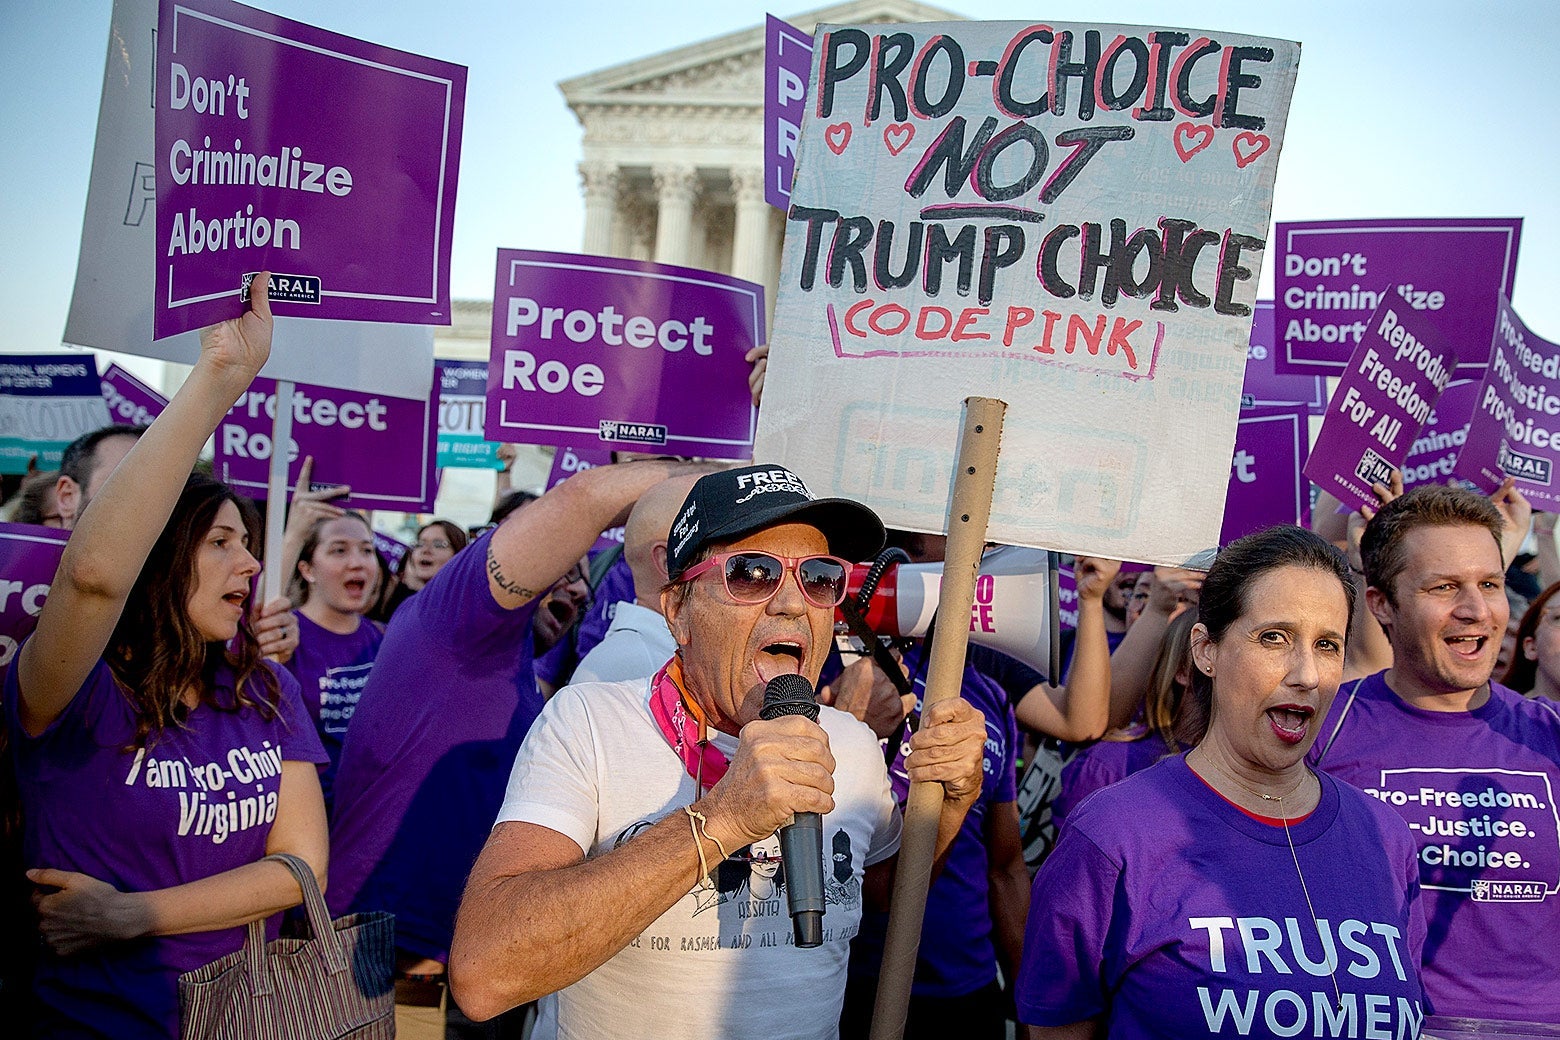 A crowd of protesters holding signs and wearing shirts with slogans such as "Trust Women," "Don't Criminalize Abortion," and "Protect Roe," with the Supreme Court in the background.